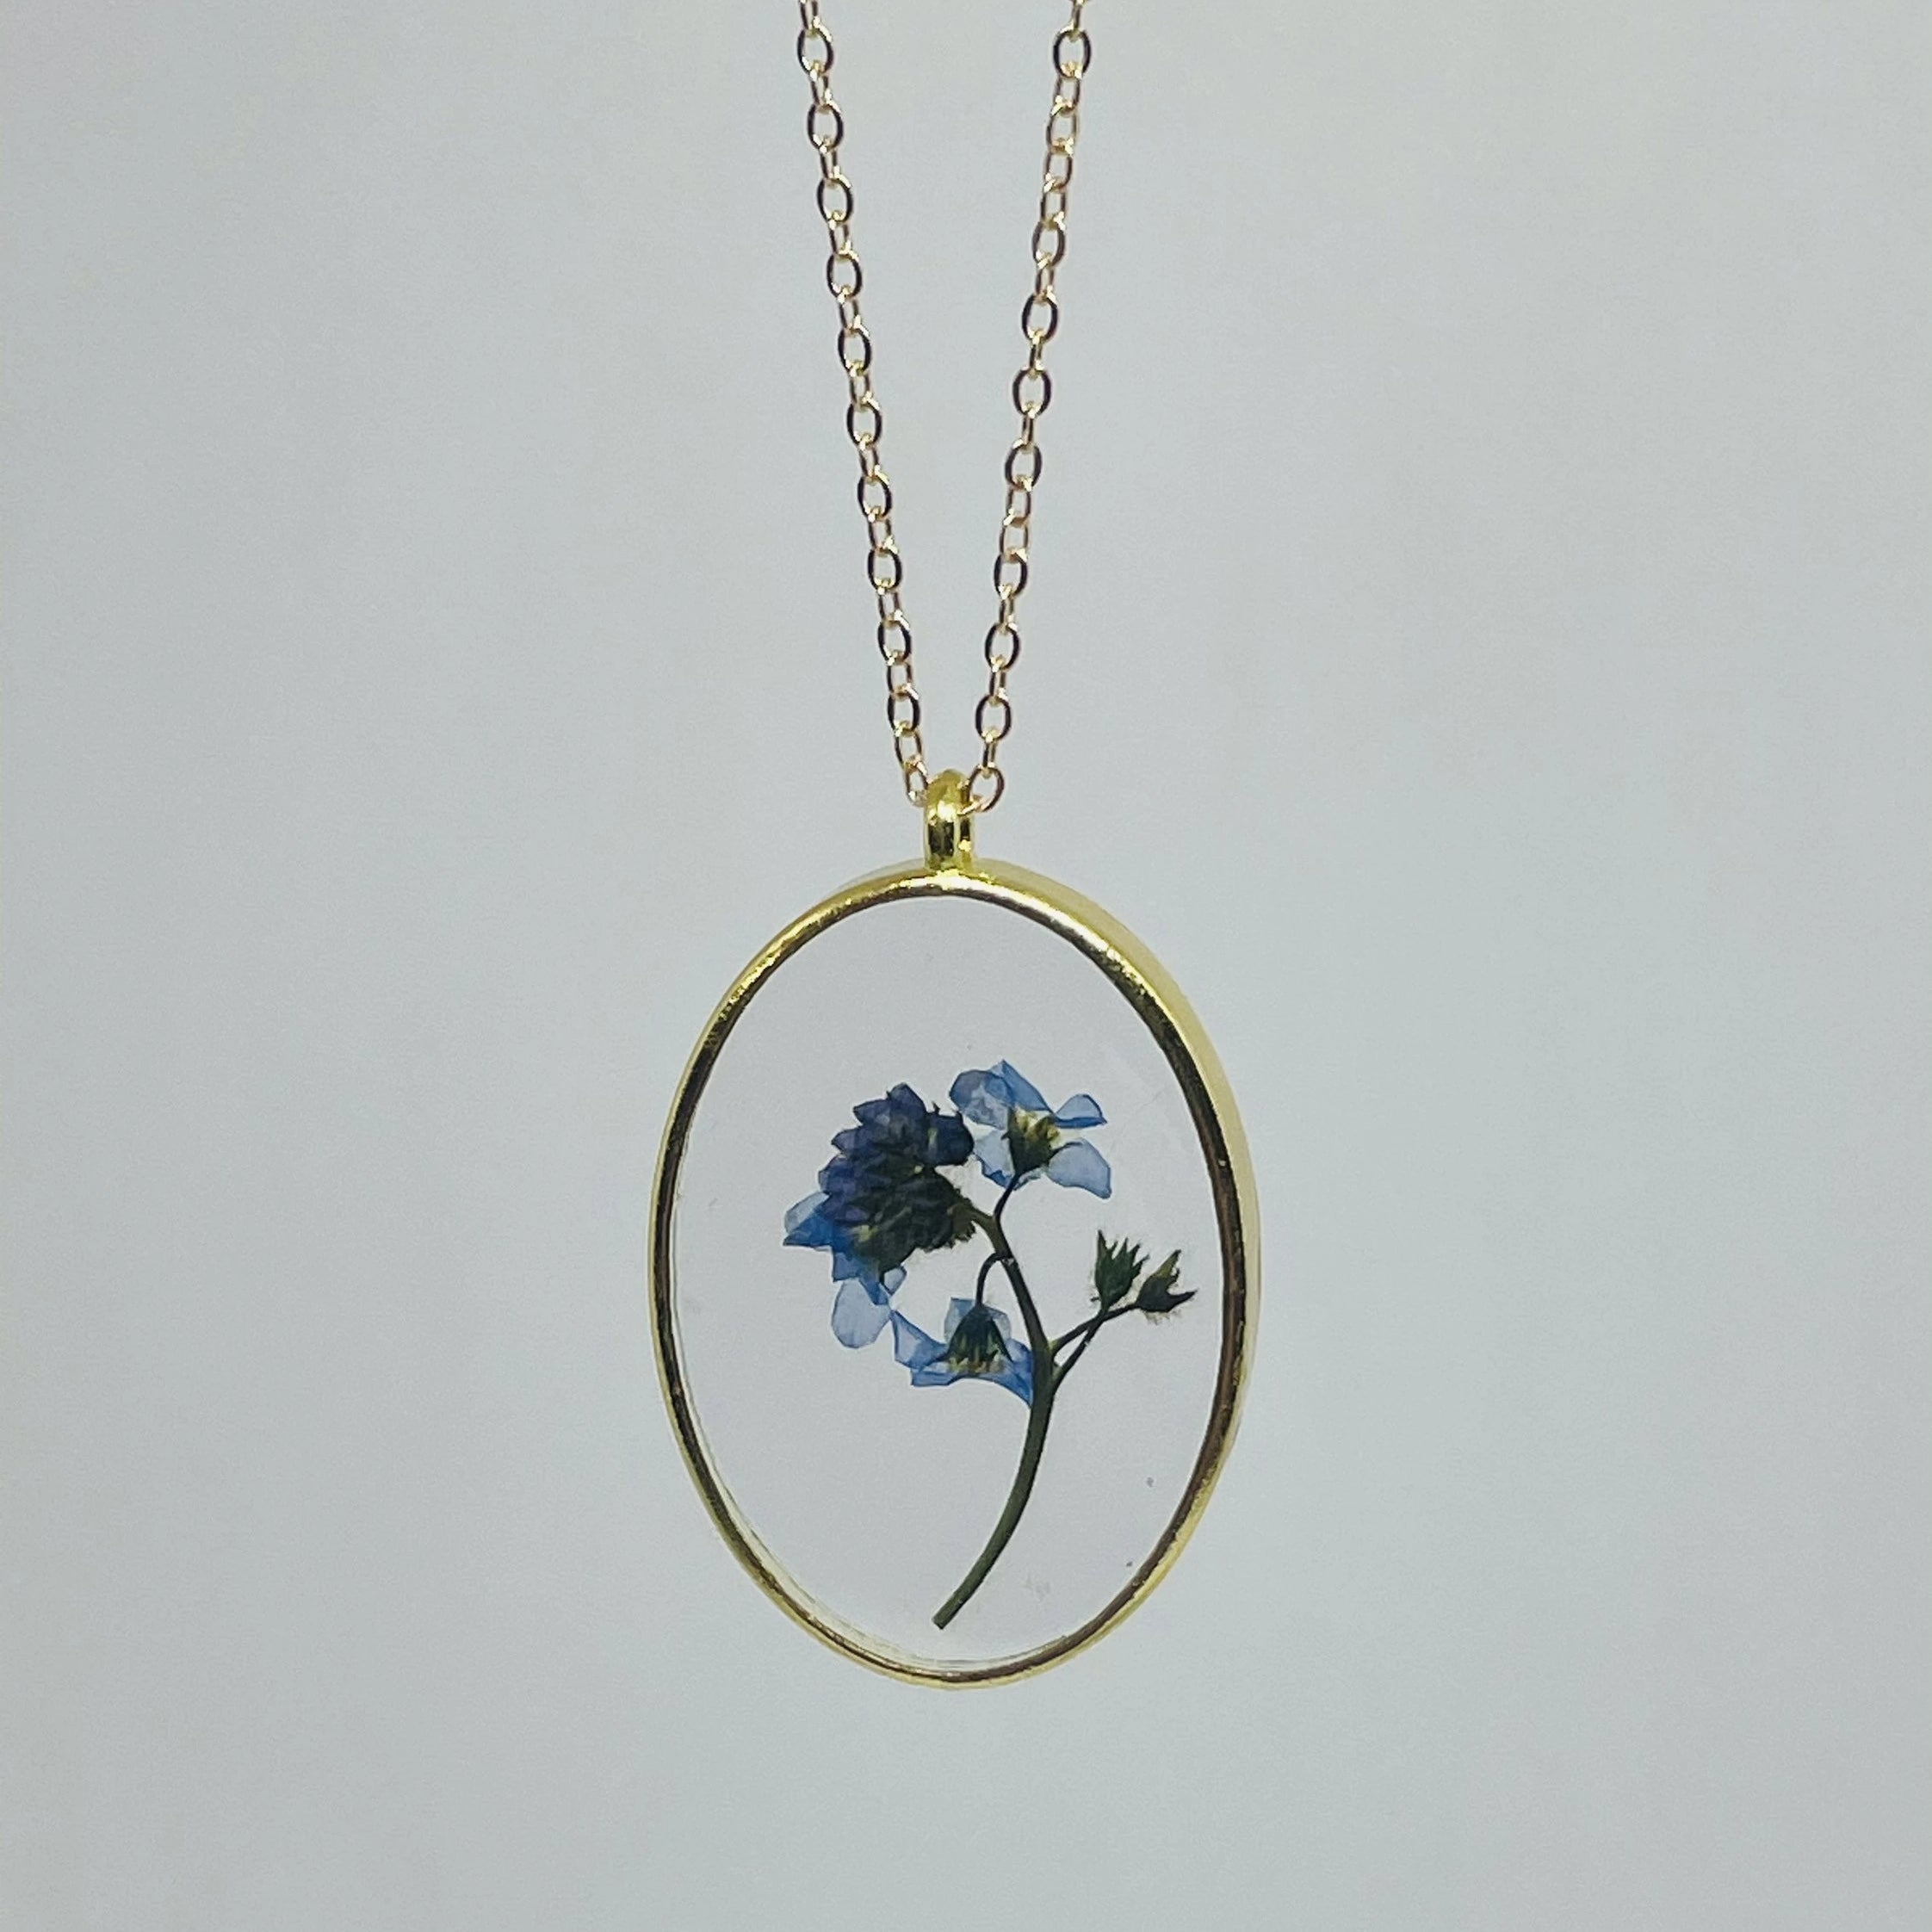 Forget Me Not Pressed Flower Necklace